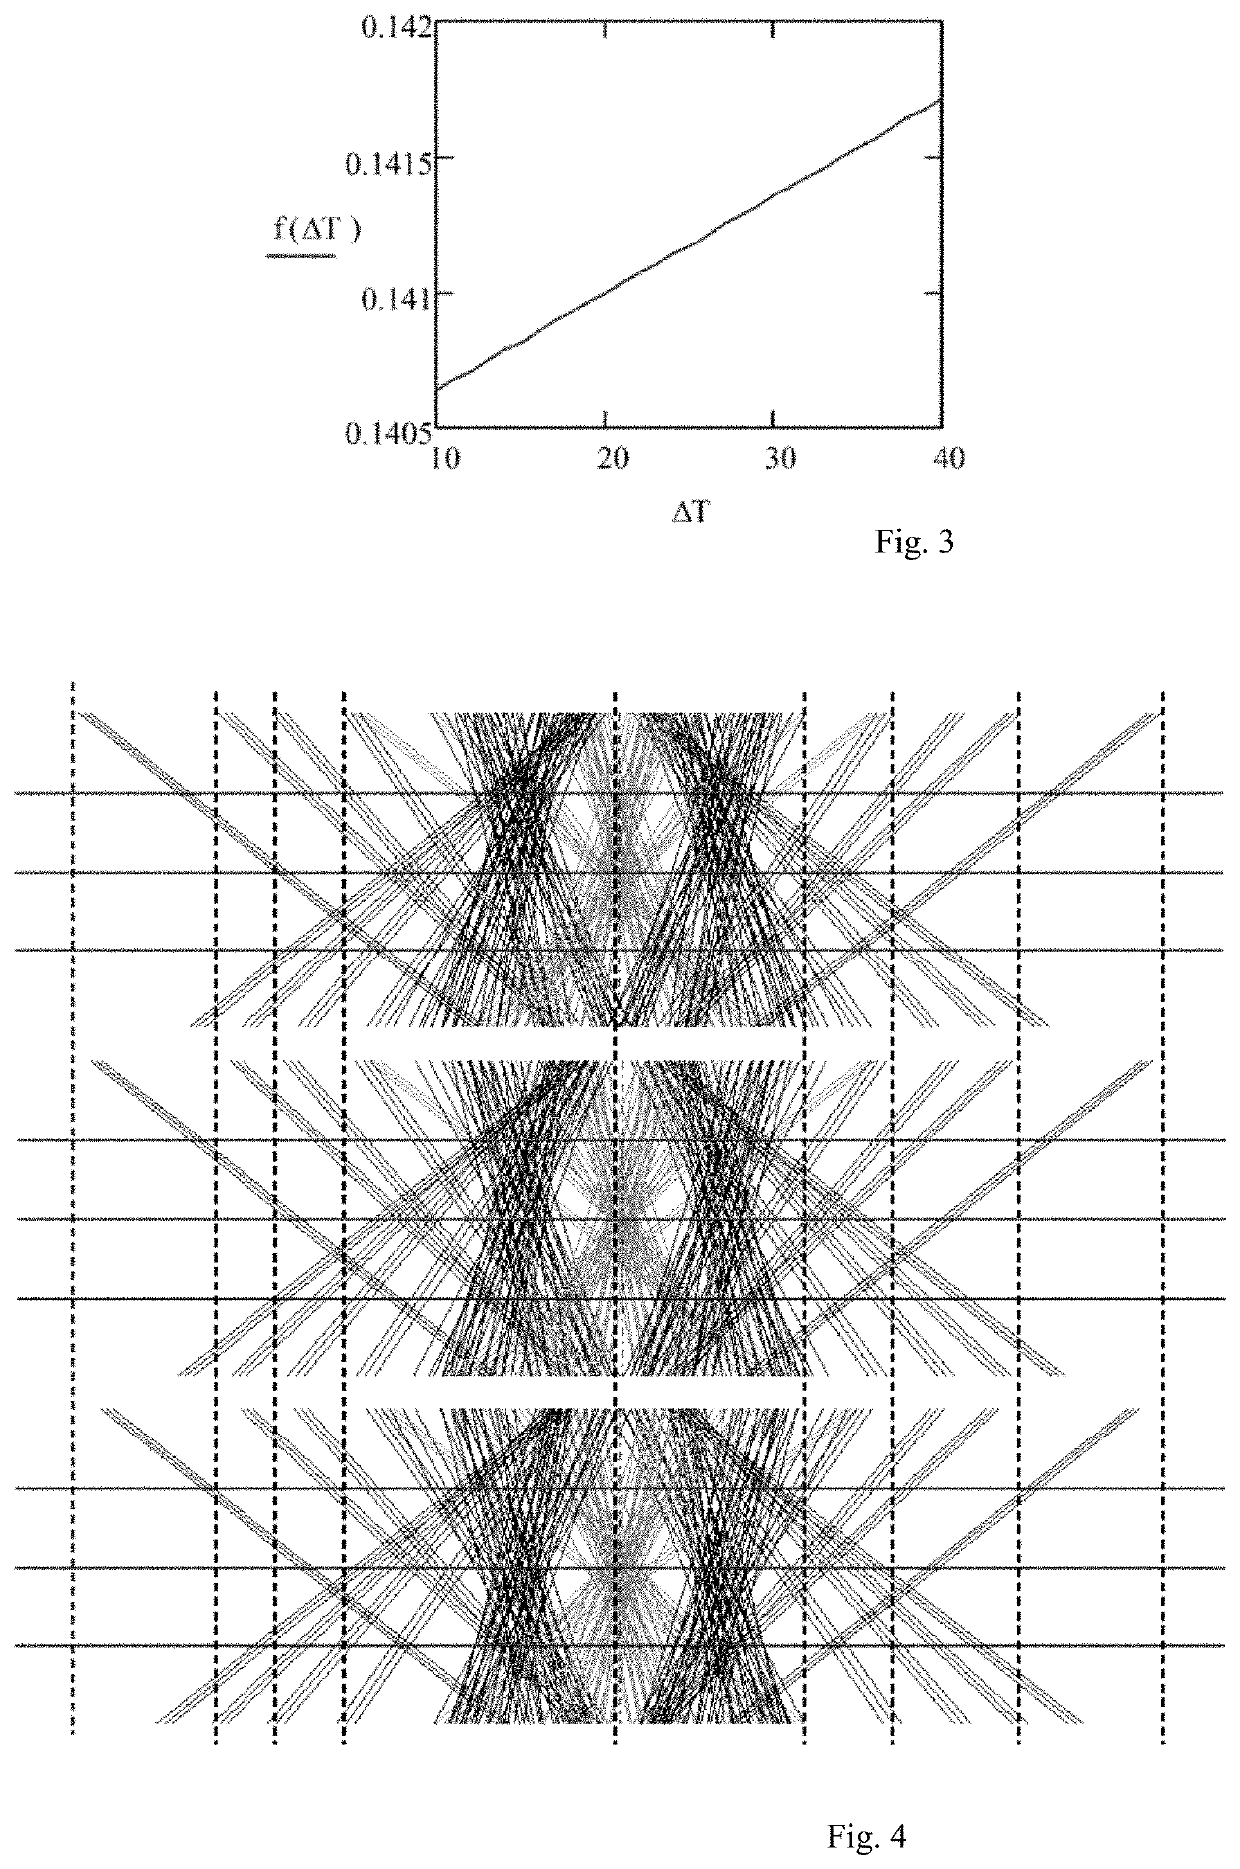 Arrangement and method for compensating for the temperature dependence of a facet lens for determining the topography of an eye